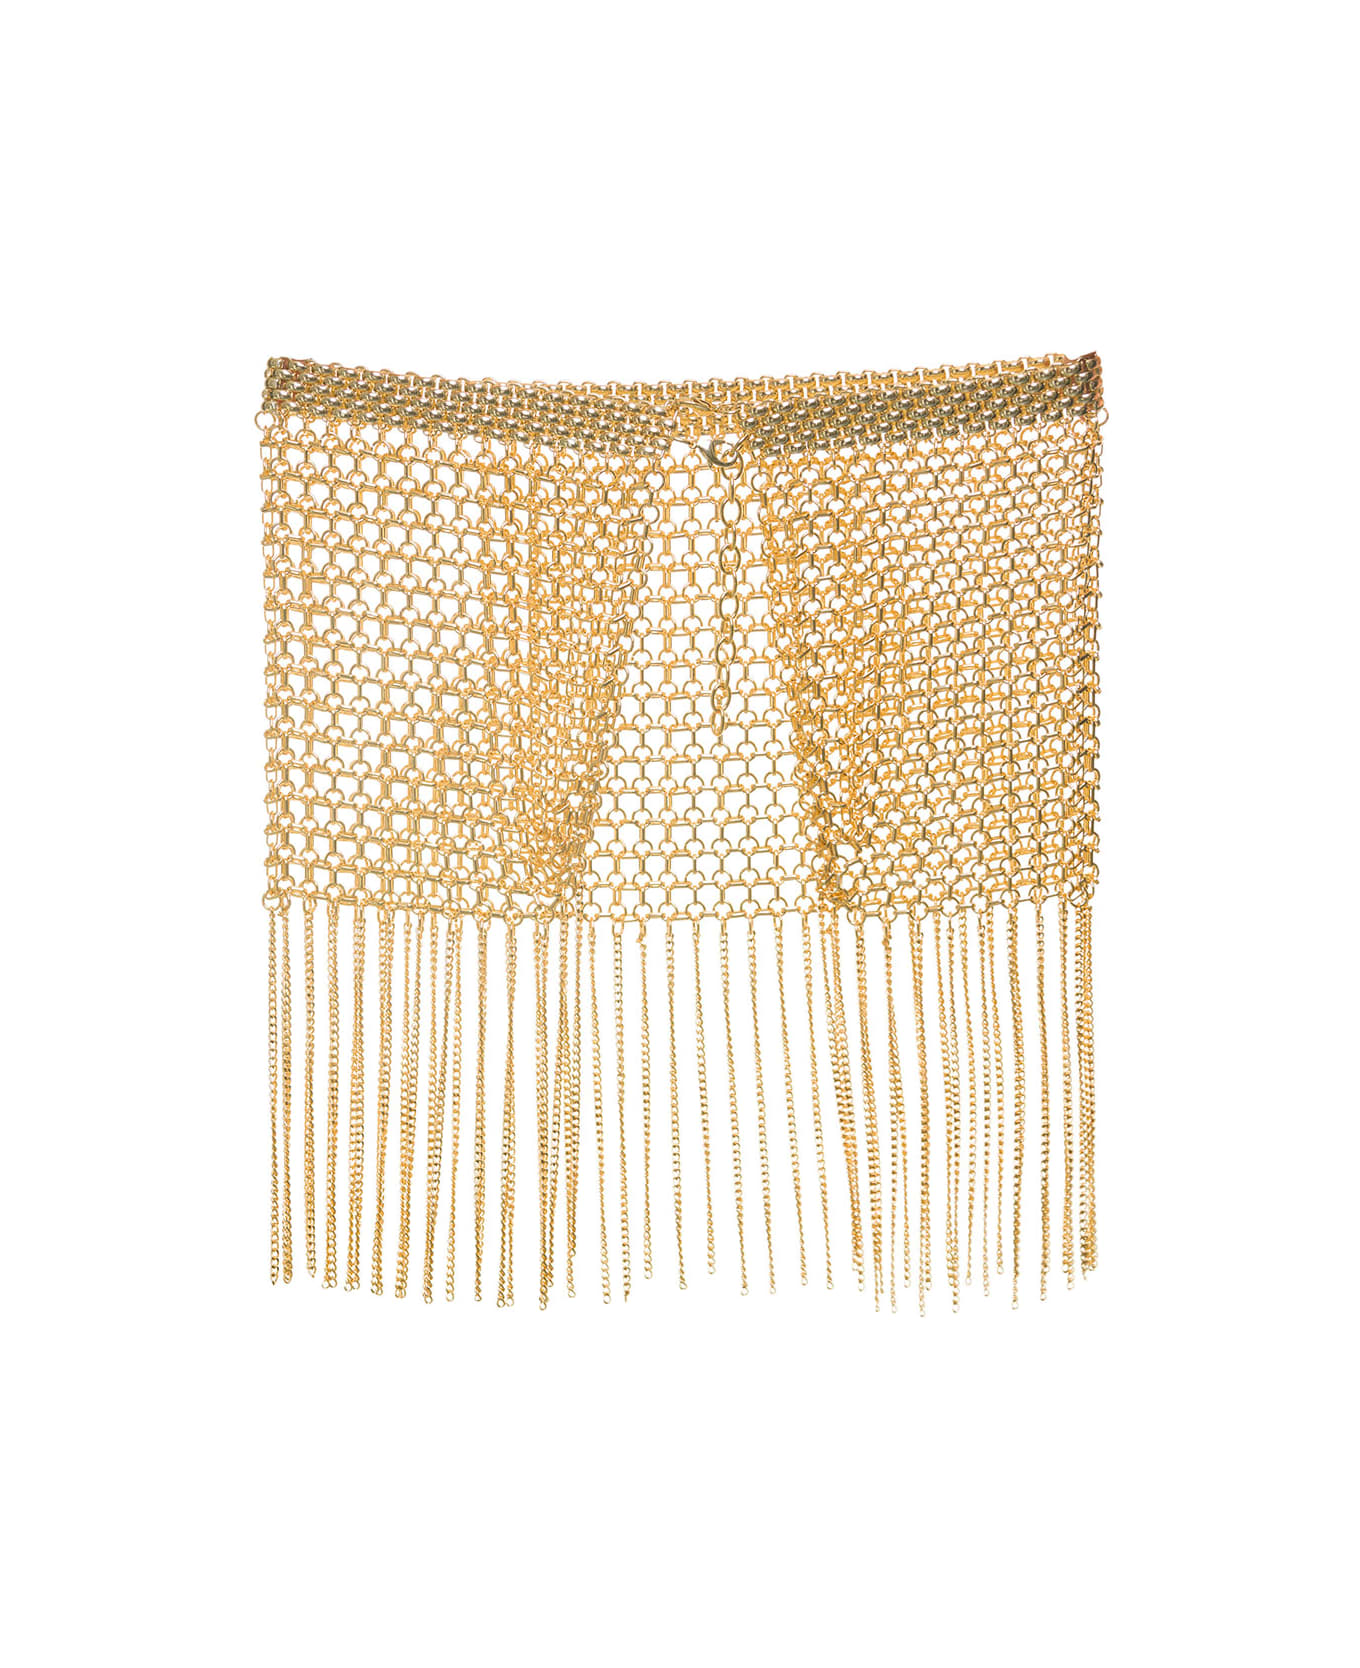 Silvia Gnecchi Woman's Chain Miniskirt With Fringes - Metallic